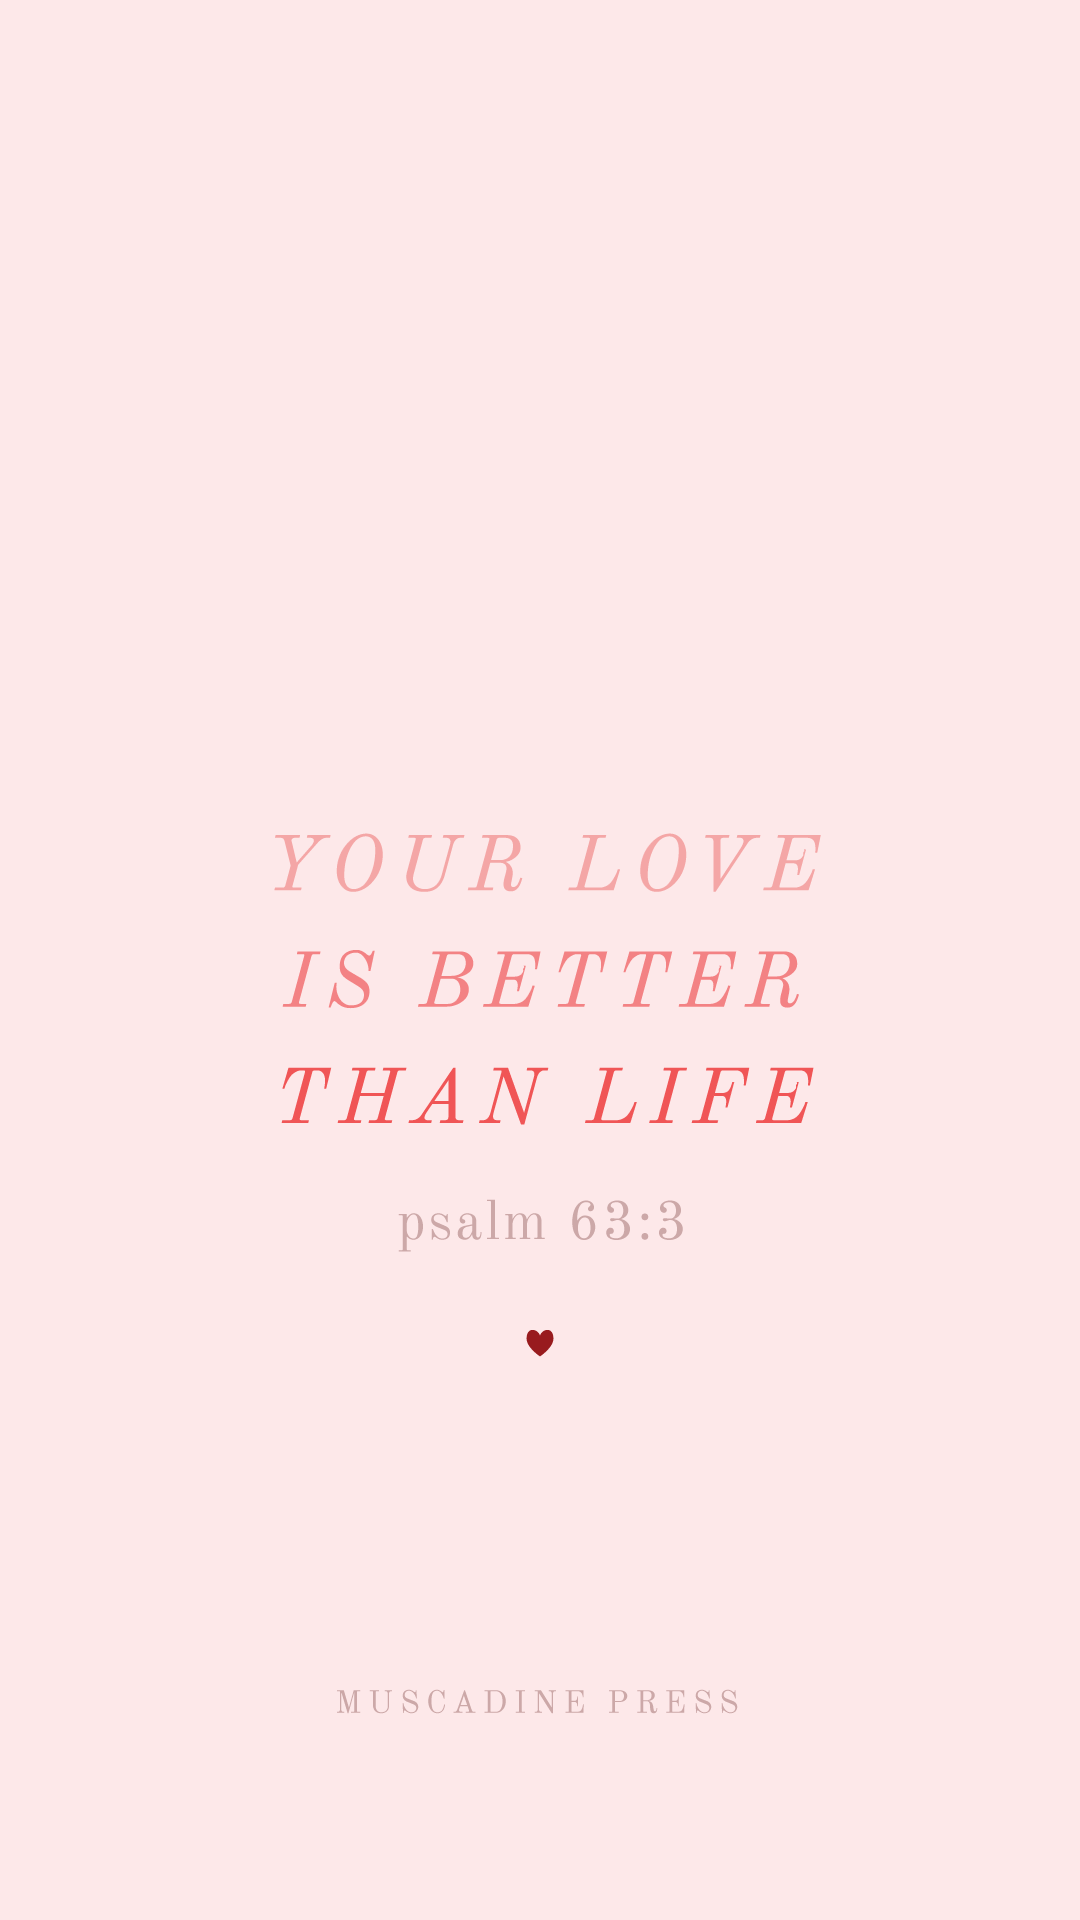 Your love is better than life. Free phone lockscreen from Muscadine Press